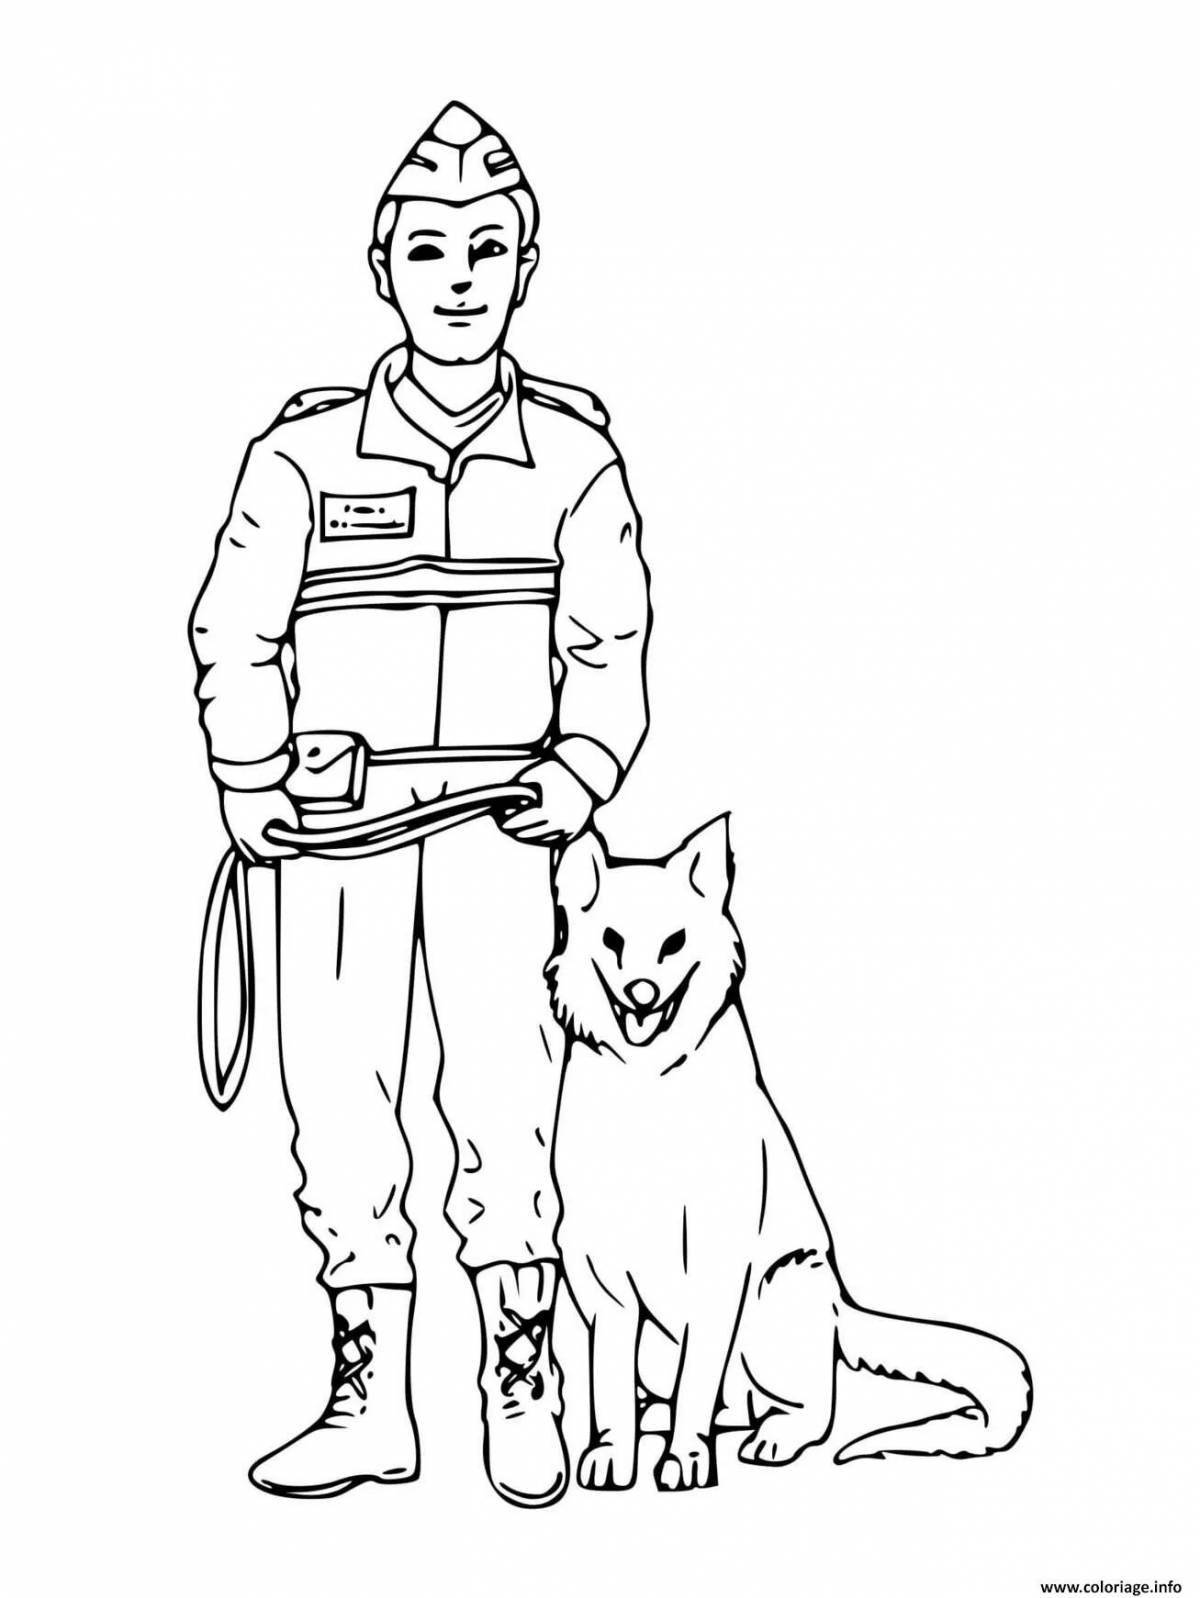 Colourful coloring book about the military profession for children 4-5 years old